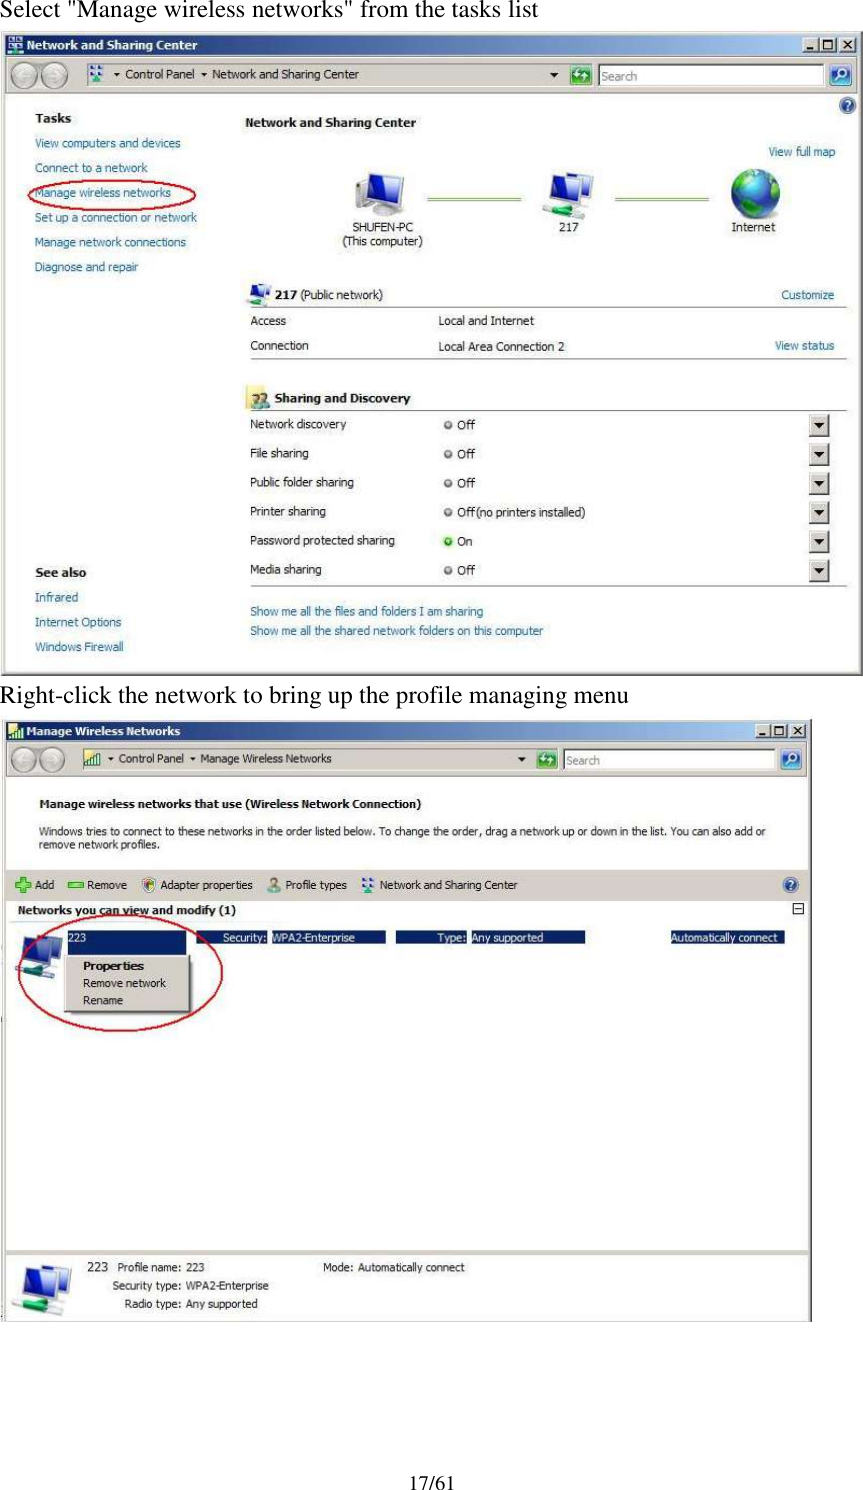 17/61Select &quot;Manage wireless networks&quot; from the tasks listRight-click the network to bring up the profile managing menu